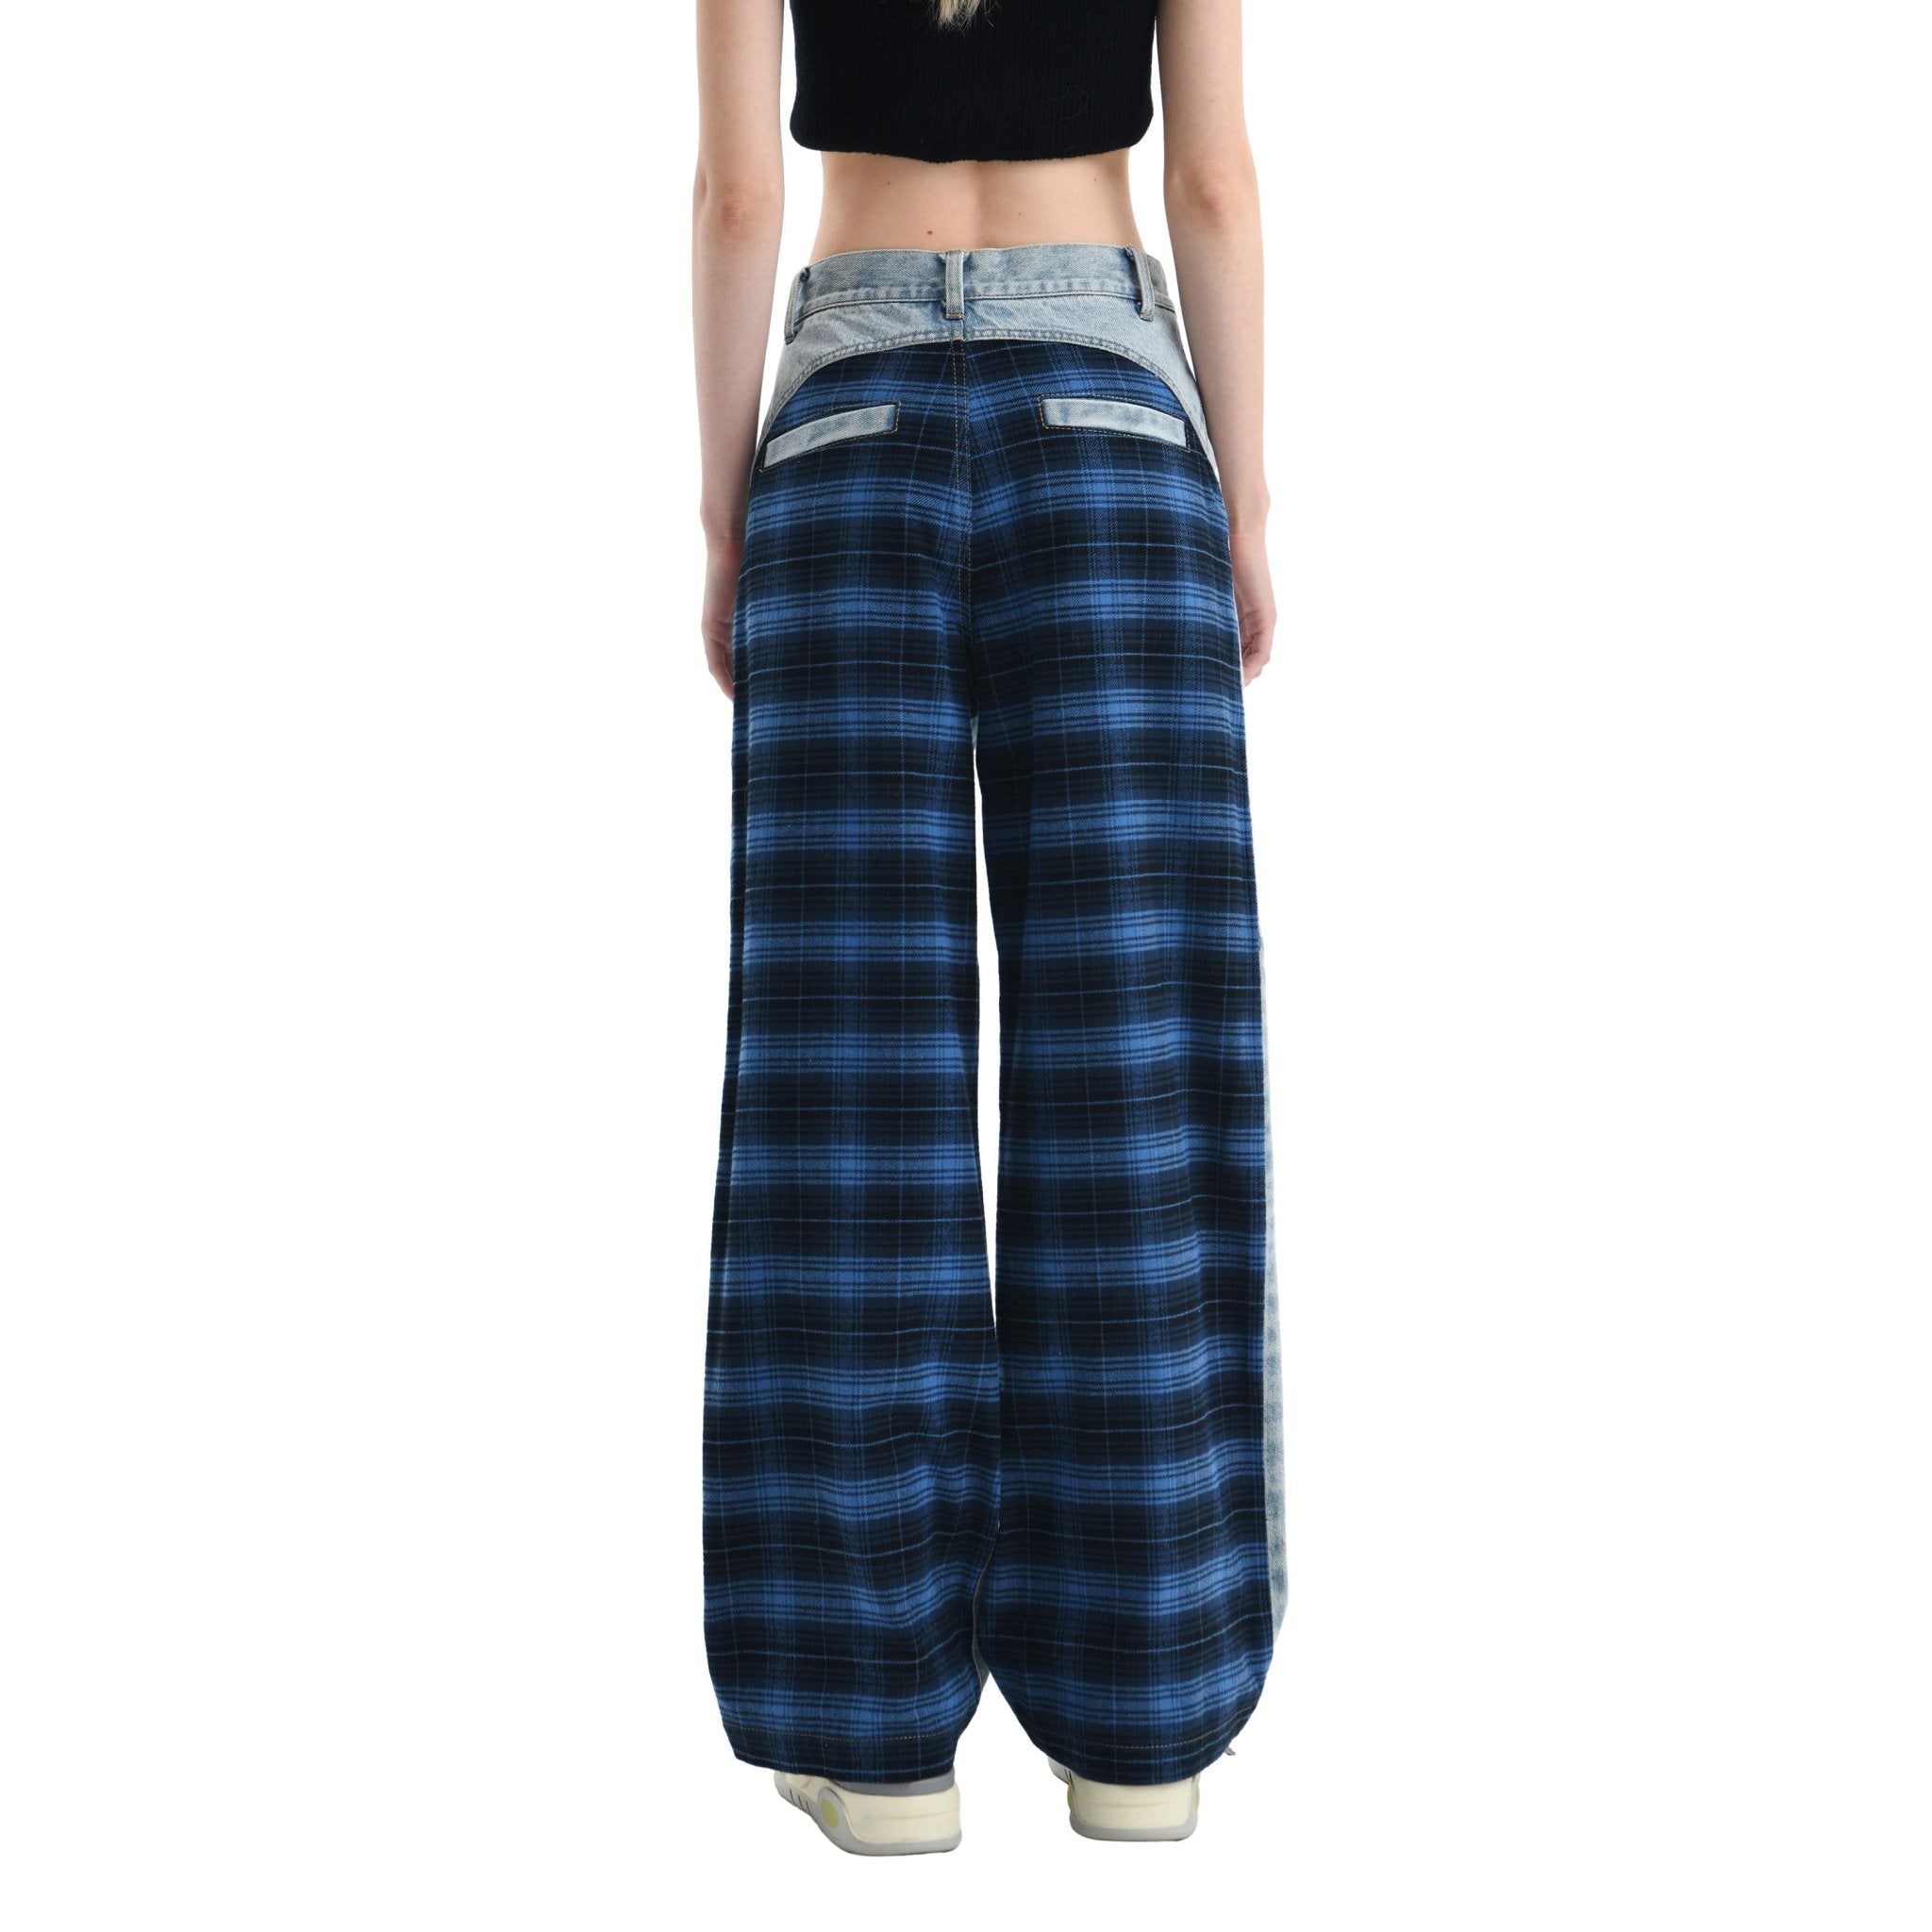 ANN ANDELMAN Blue Plaid Patchwork Jeans | MADA IN CHINA